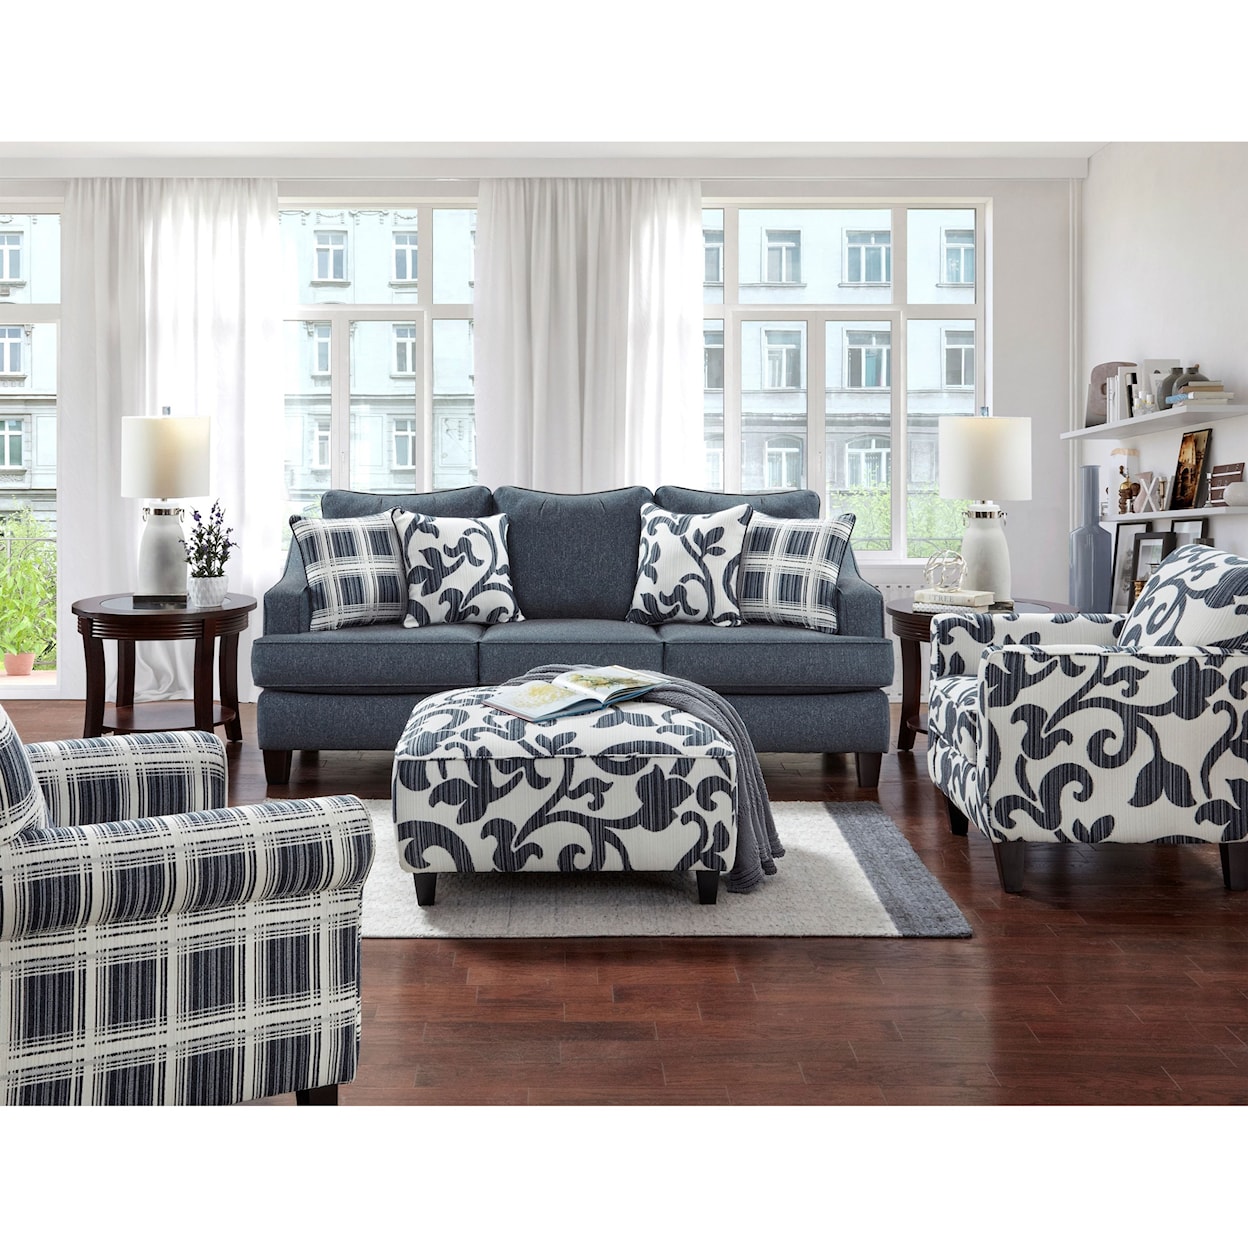 Fusion Furniture 2330 TRUTH OR DARE Living Room Group